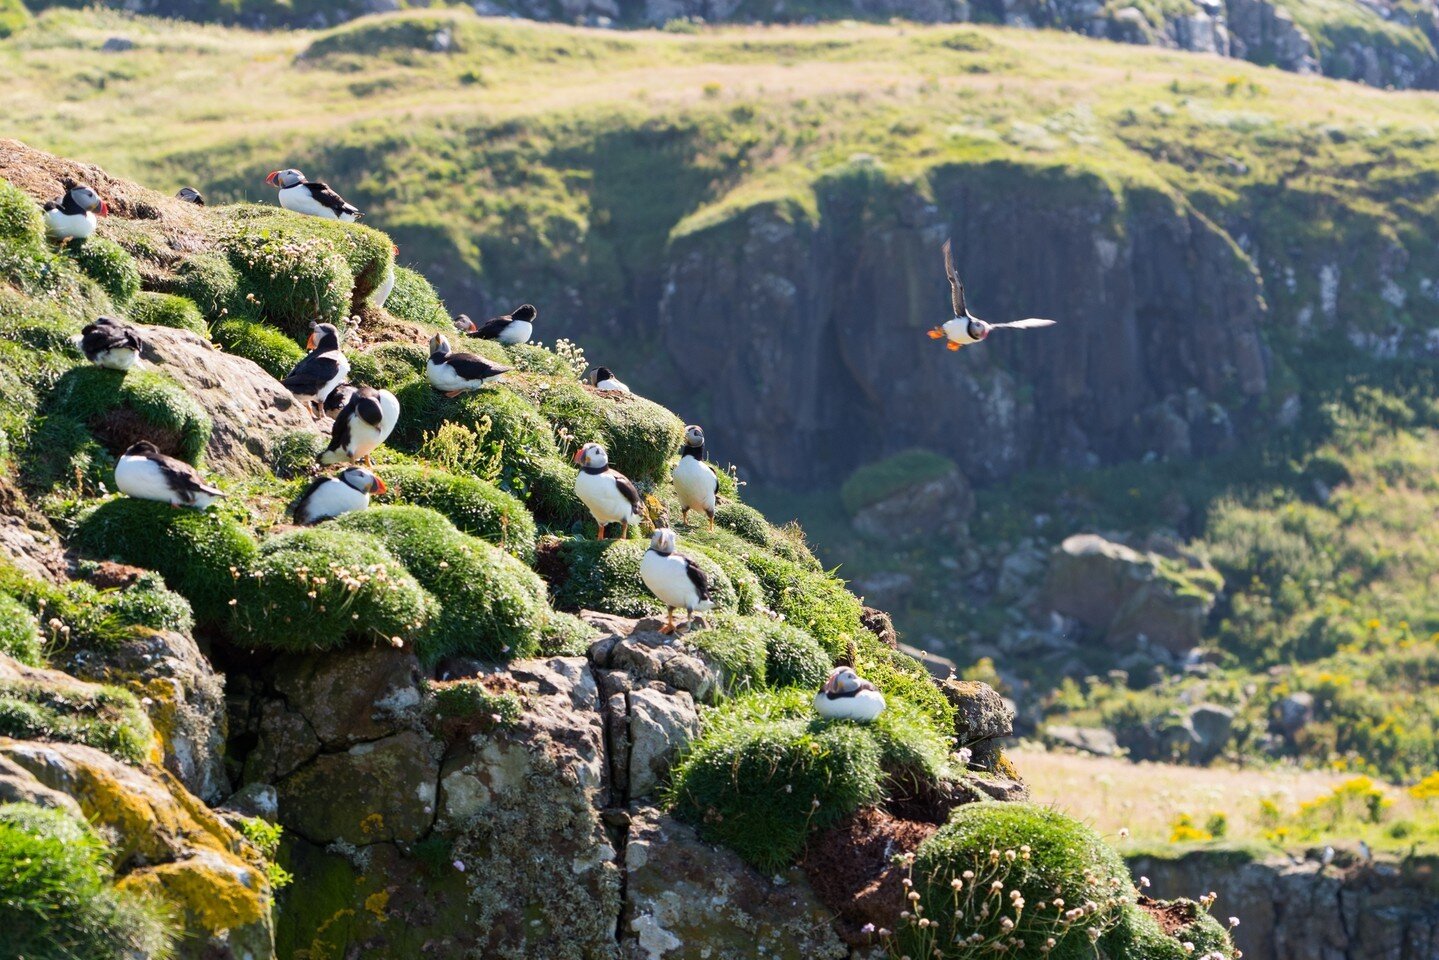 Did you know that you can find puffins on the Scottish coast? 🏴󠁧󠁢󠁳󠁣󠁴󠁿 Known by some as 'clowns of the sea,' puffins typically arrive in late March or early April, then retreat in mid-August to spend the winter months at sea.⁠
⁠
Puffins enjoy b